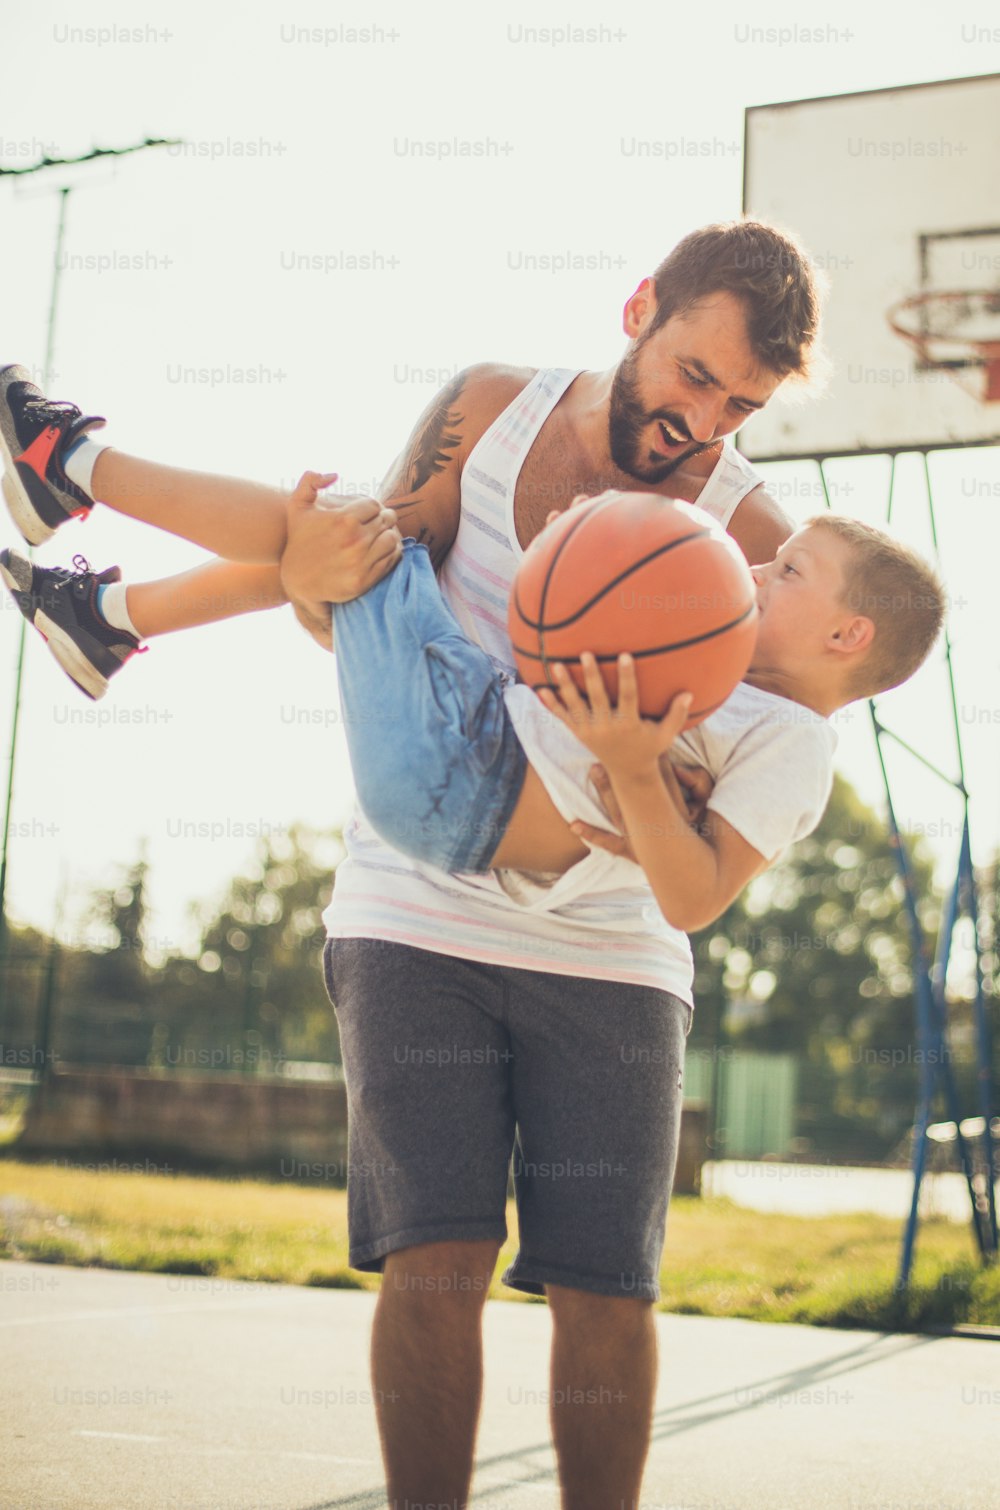 Summer is a time for sports games. Father and son on basket court.